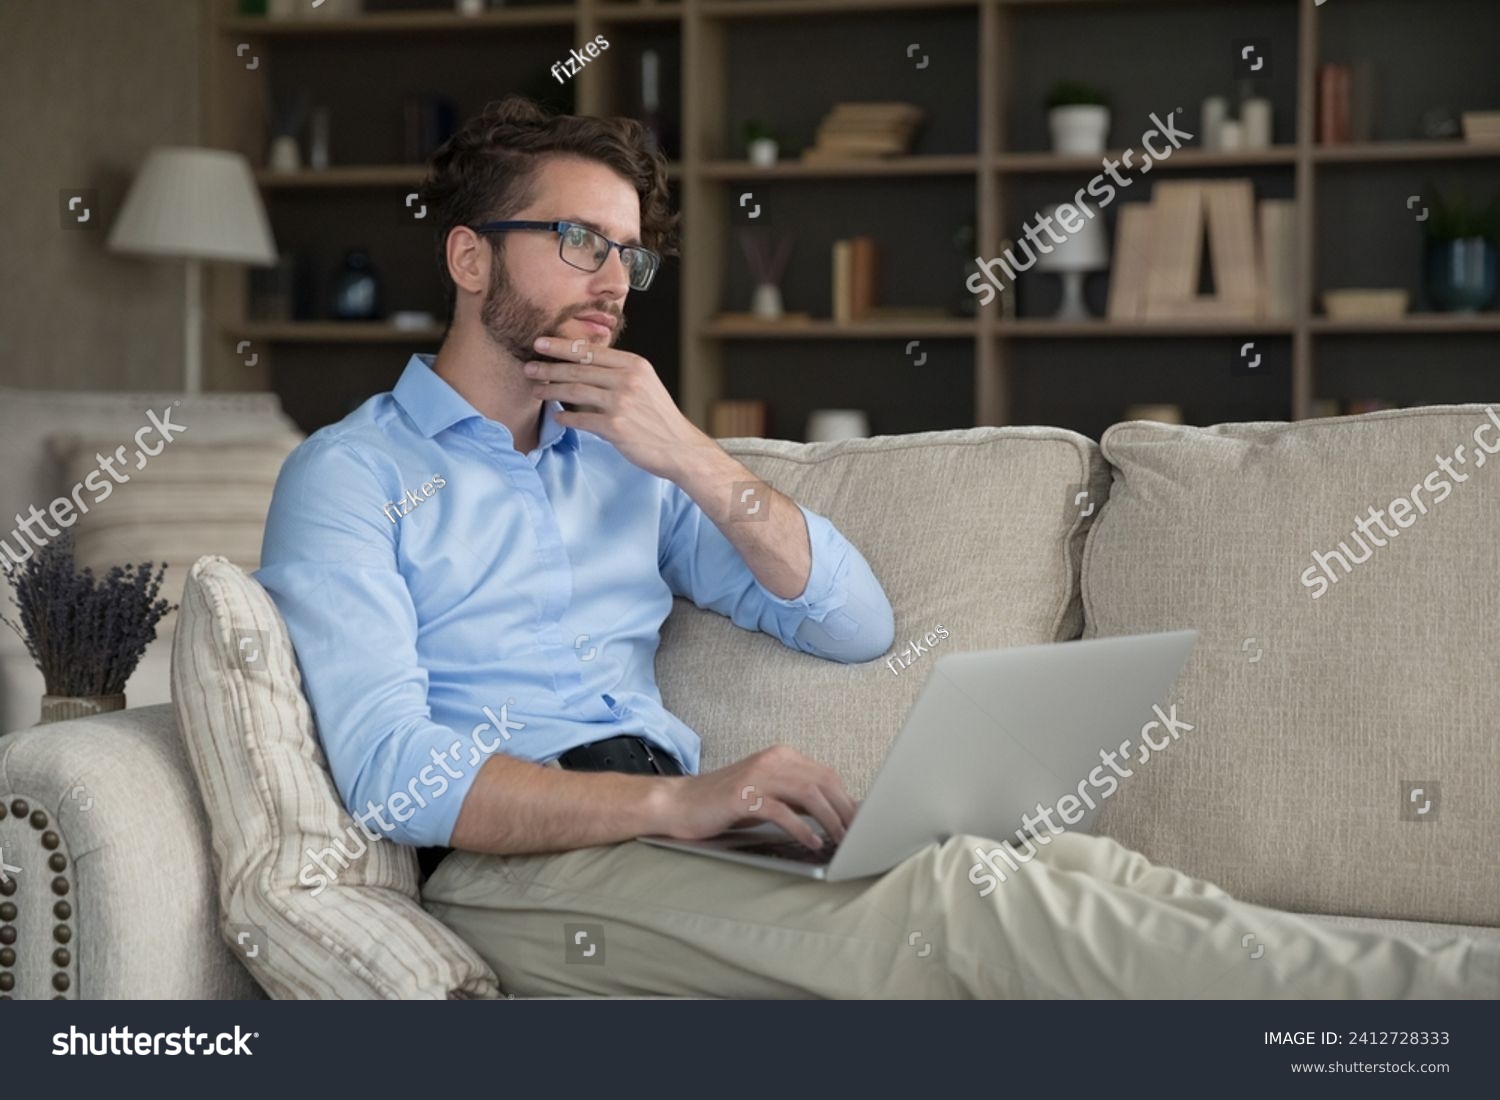 Serious thoughtful 35s man sit on sofa with wireless computer, get message, thinks on answer or creative online task, learn new AI program, looks pensive. Blogging, telework using laptop, modern tech #2412728333